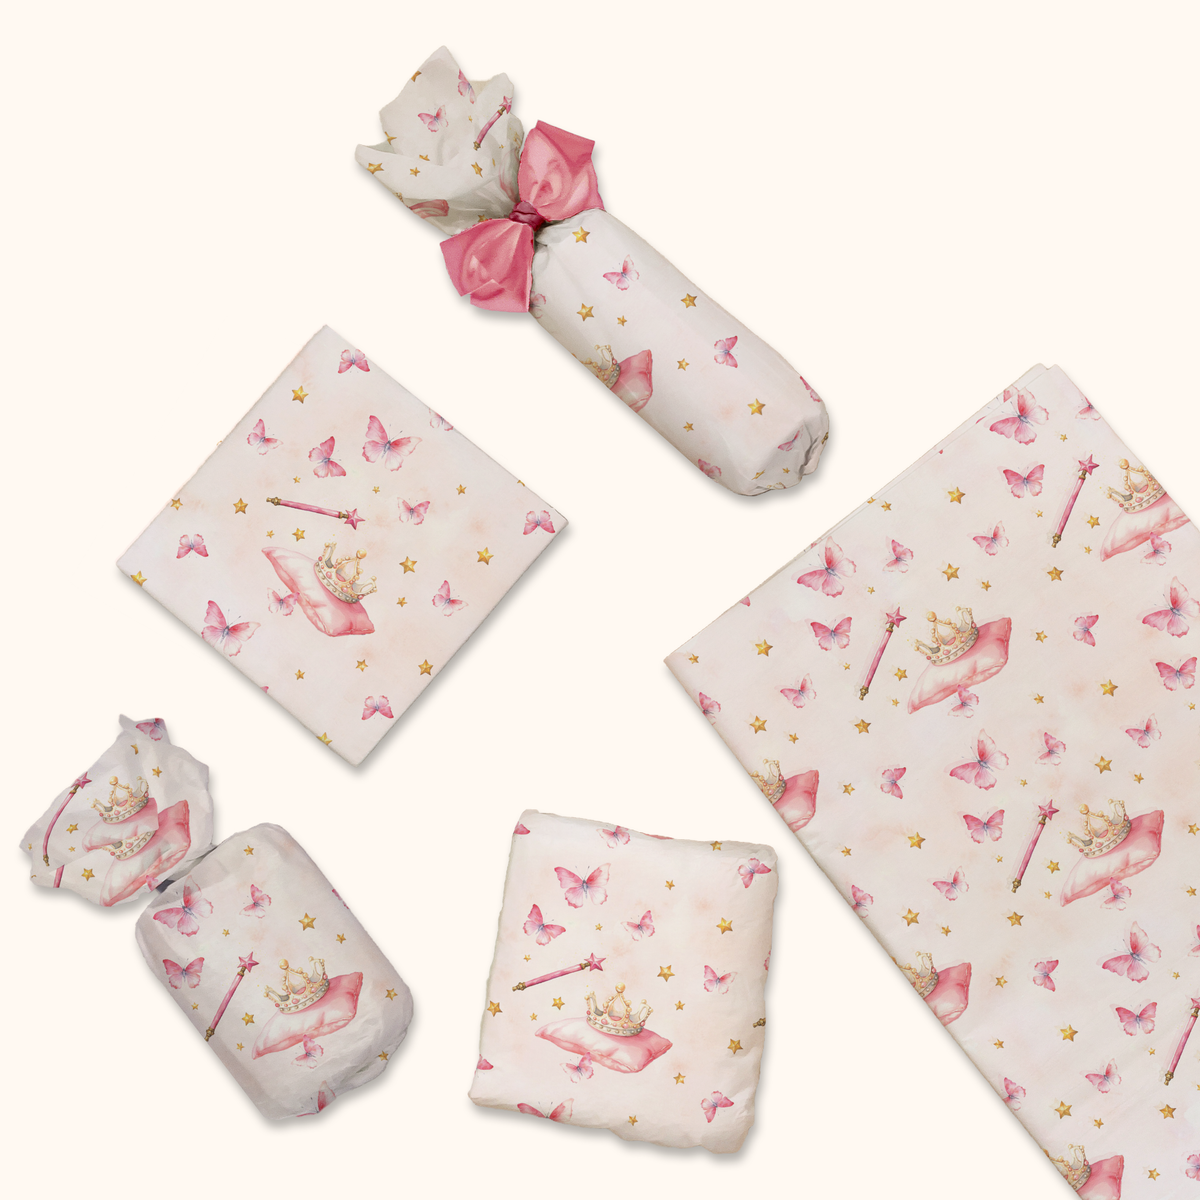 Fairy Tale Princess Designer Tissue Paper for Gift Bags